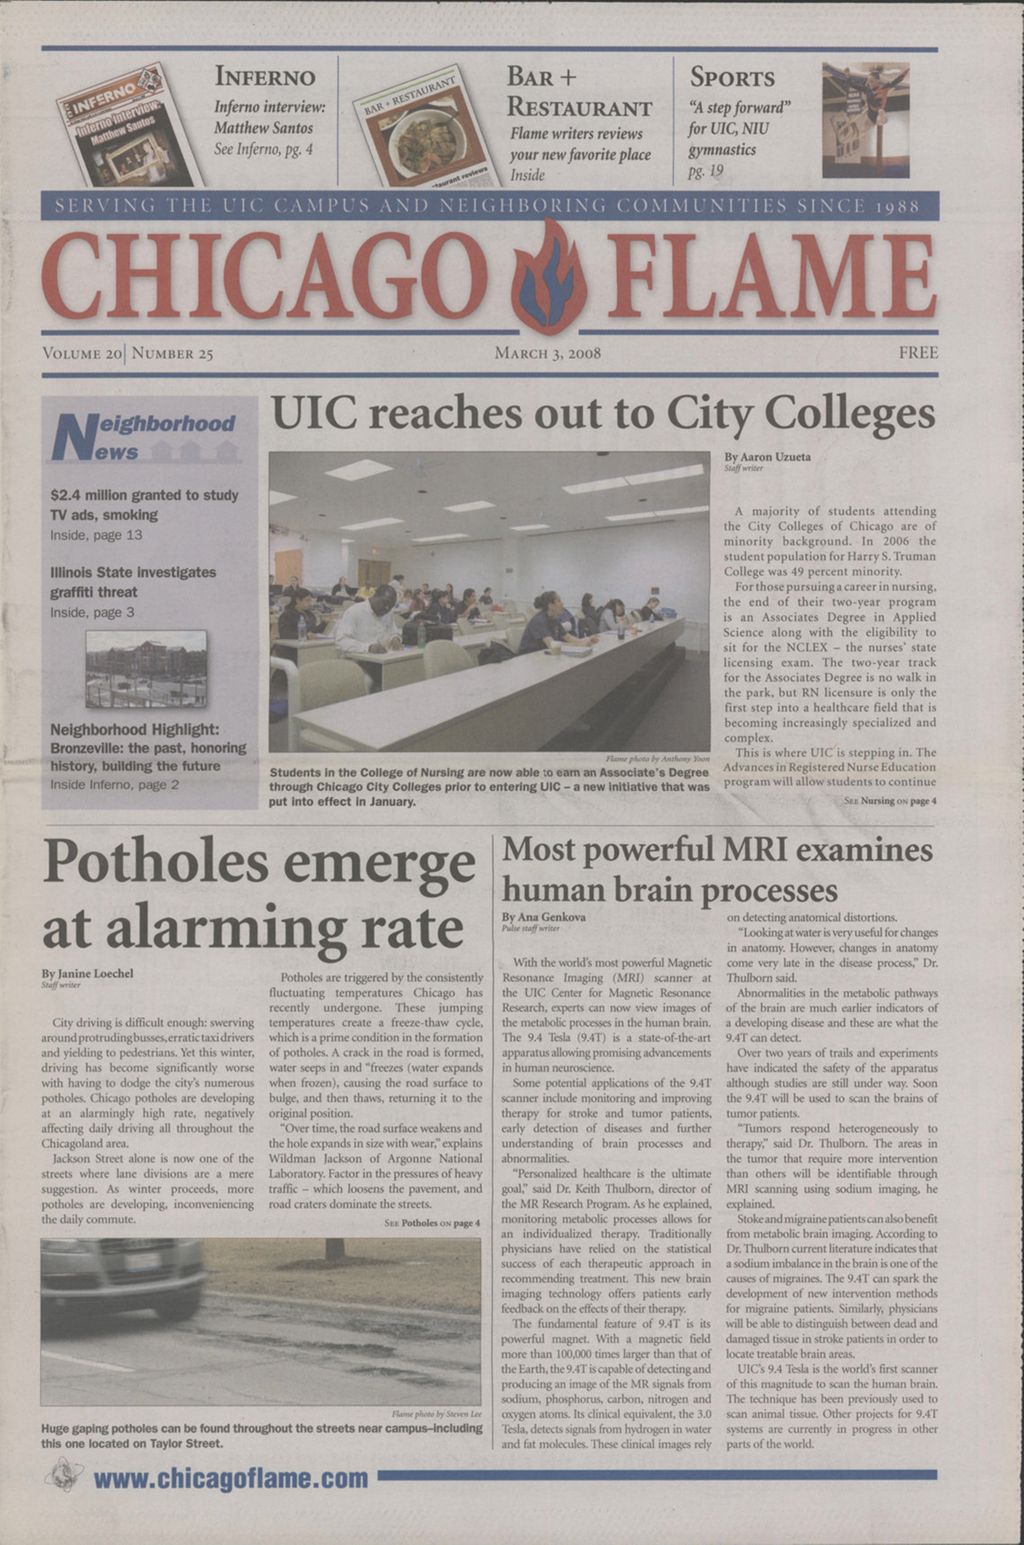 Chicago Flame (March 3, 2008)